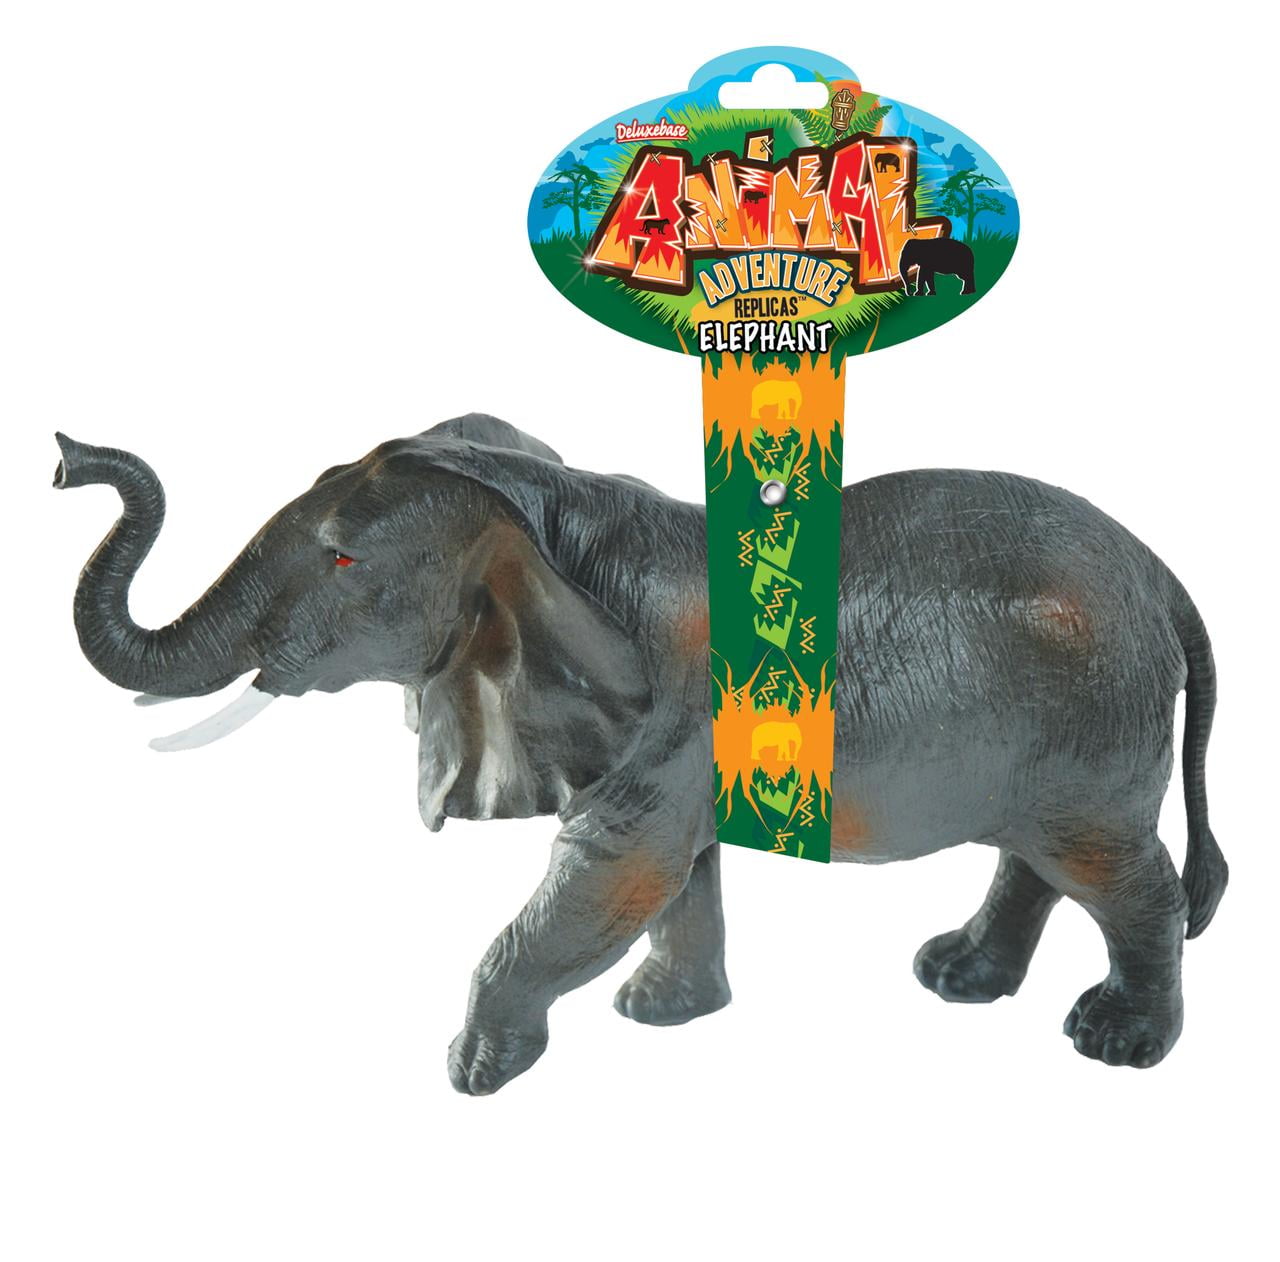 Buy Animal Adventure Replica - Elephant from Deluxebase. Elephant Toy  Plastic Animal Figures. Large sized animal figures that are ideal safari animal  toys for kids Online at Lowest Price in Ubuy Mexico.